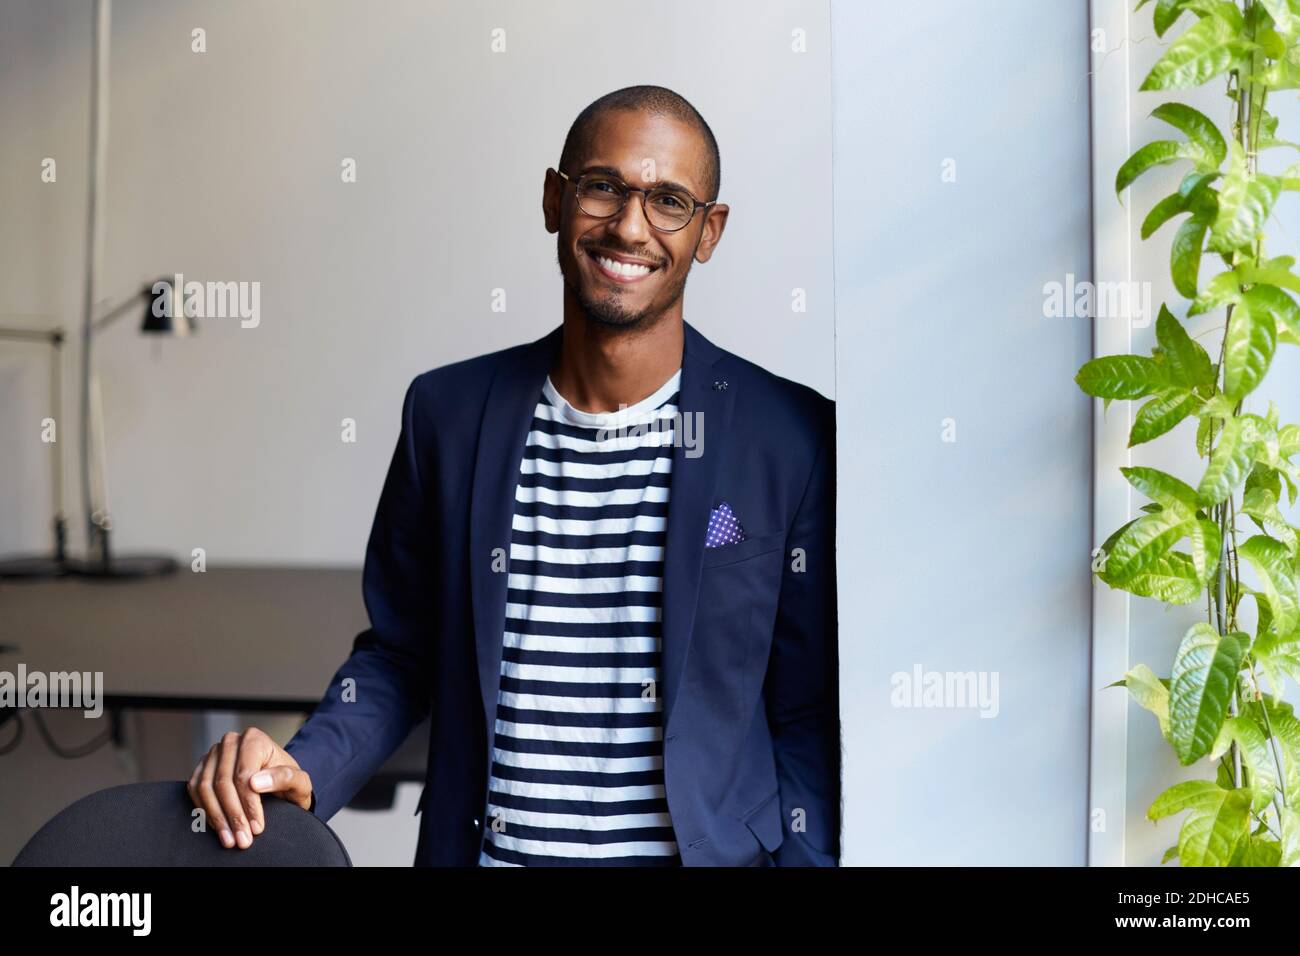 Portrait of smiling male entrepreneur standing by wall in creative office Stock Photo